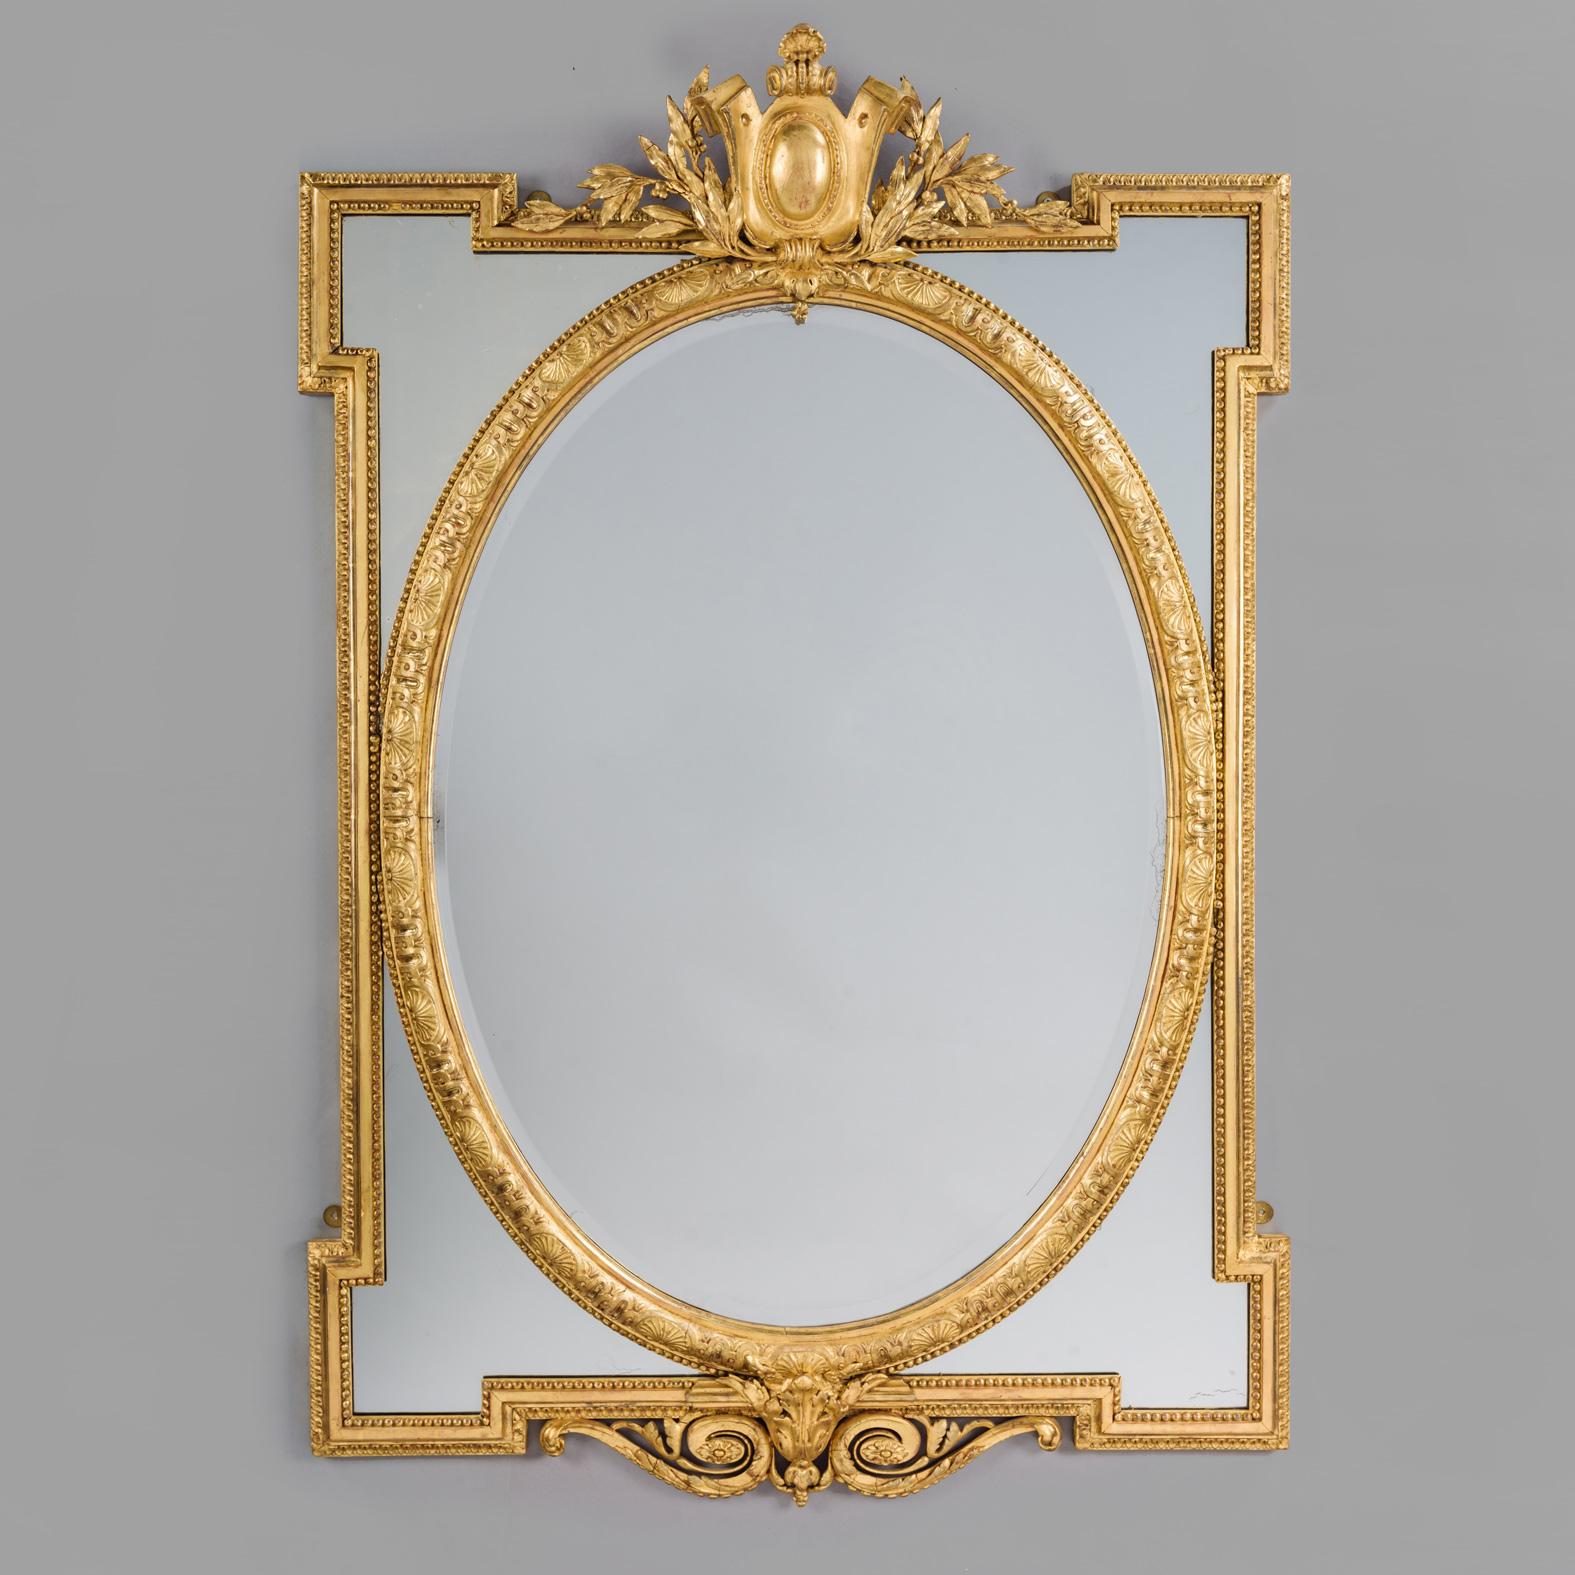 A Fine Pair of Louis XVI Style Giltwood Marginal Frame Mirrors. 

This fine pair of carved giltwood and geso mirrors each have an oval bevelled mirror plate framed by four mirrored spandrels within beaded and lotus-leaf moulded borders, surmounted